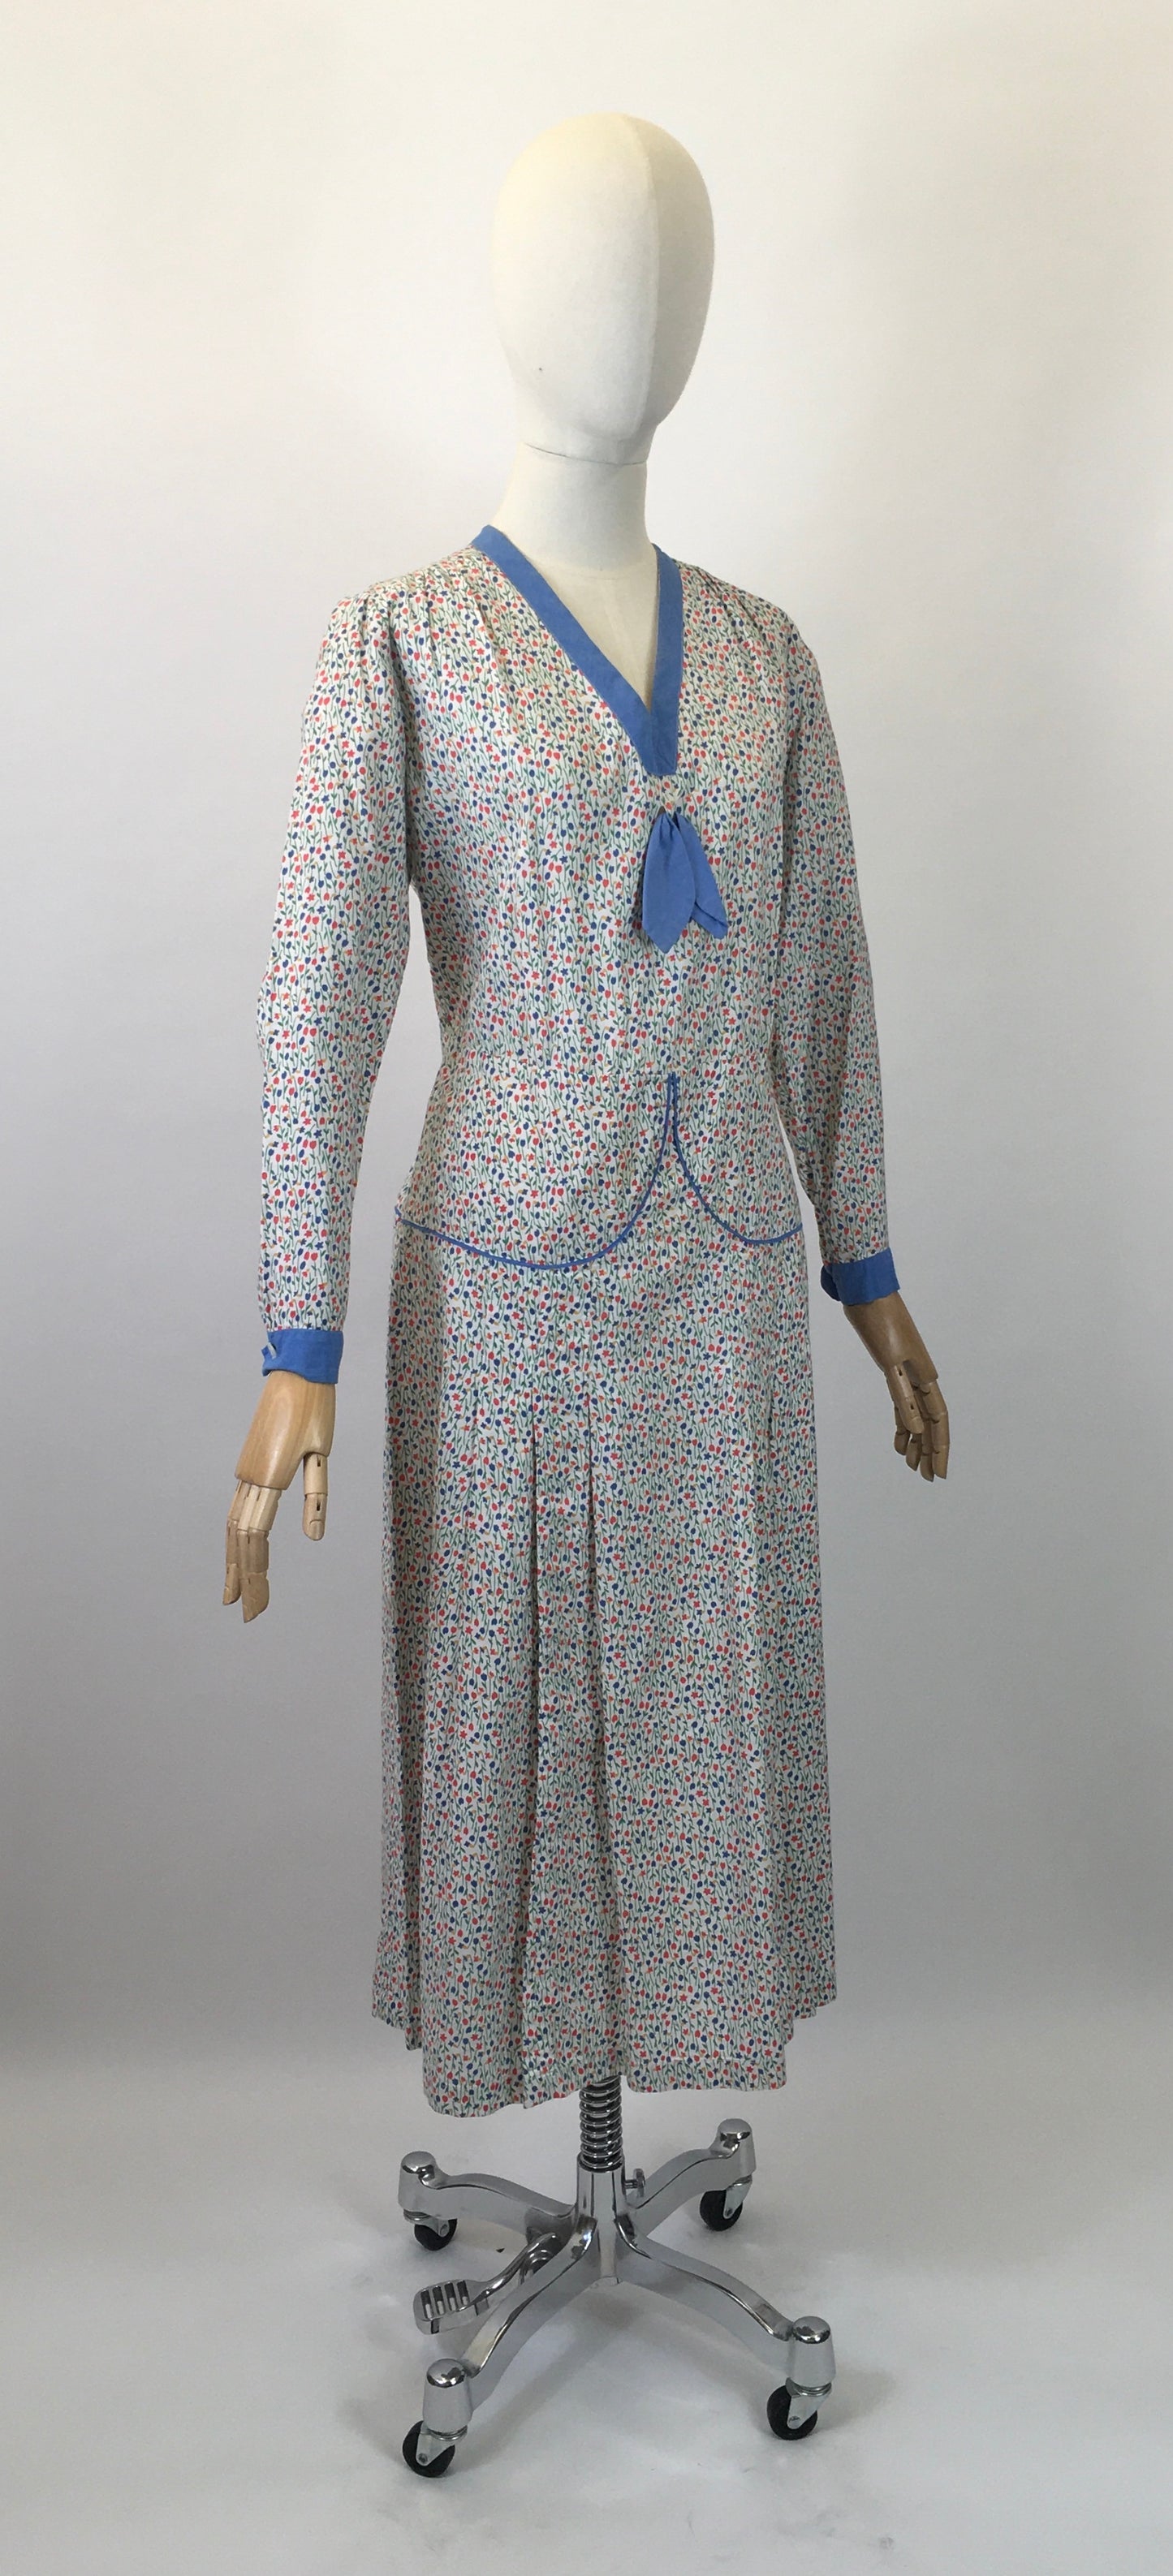 Original 1930’s Darling Floral Day Dress - In a Meadow Print with Greens, Blues, Yellows & Orange.